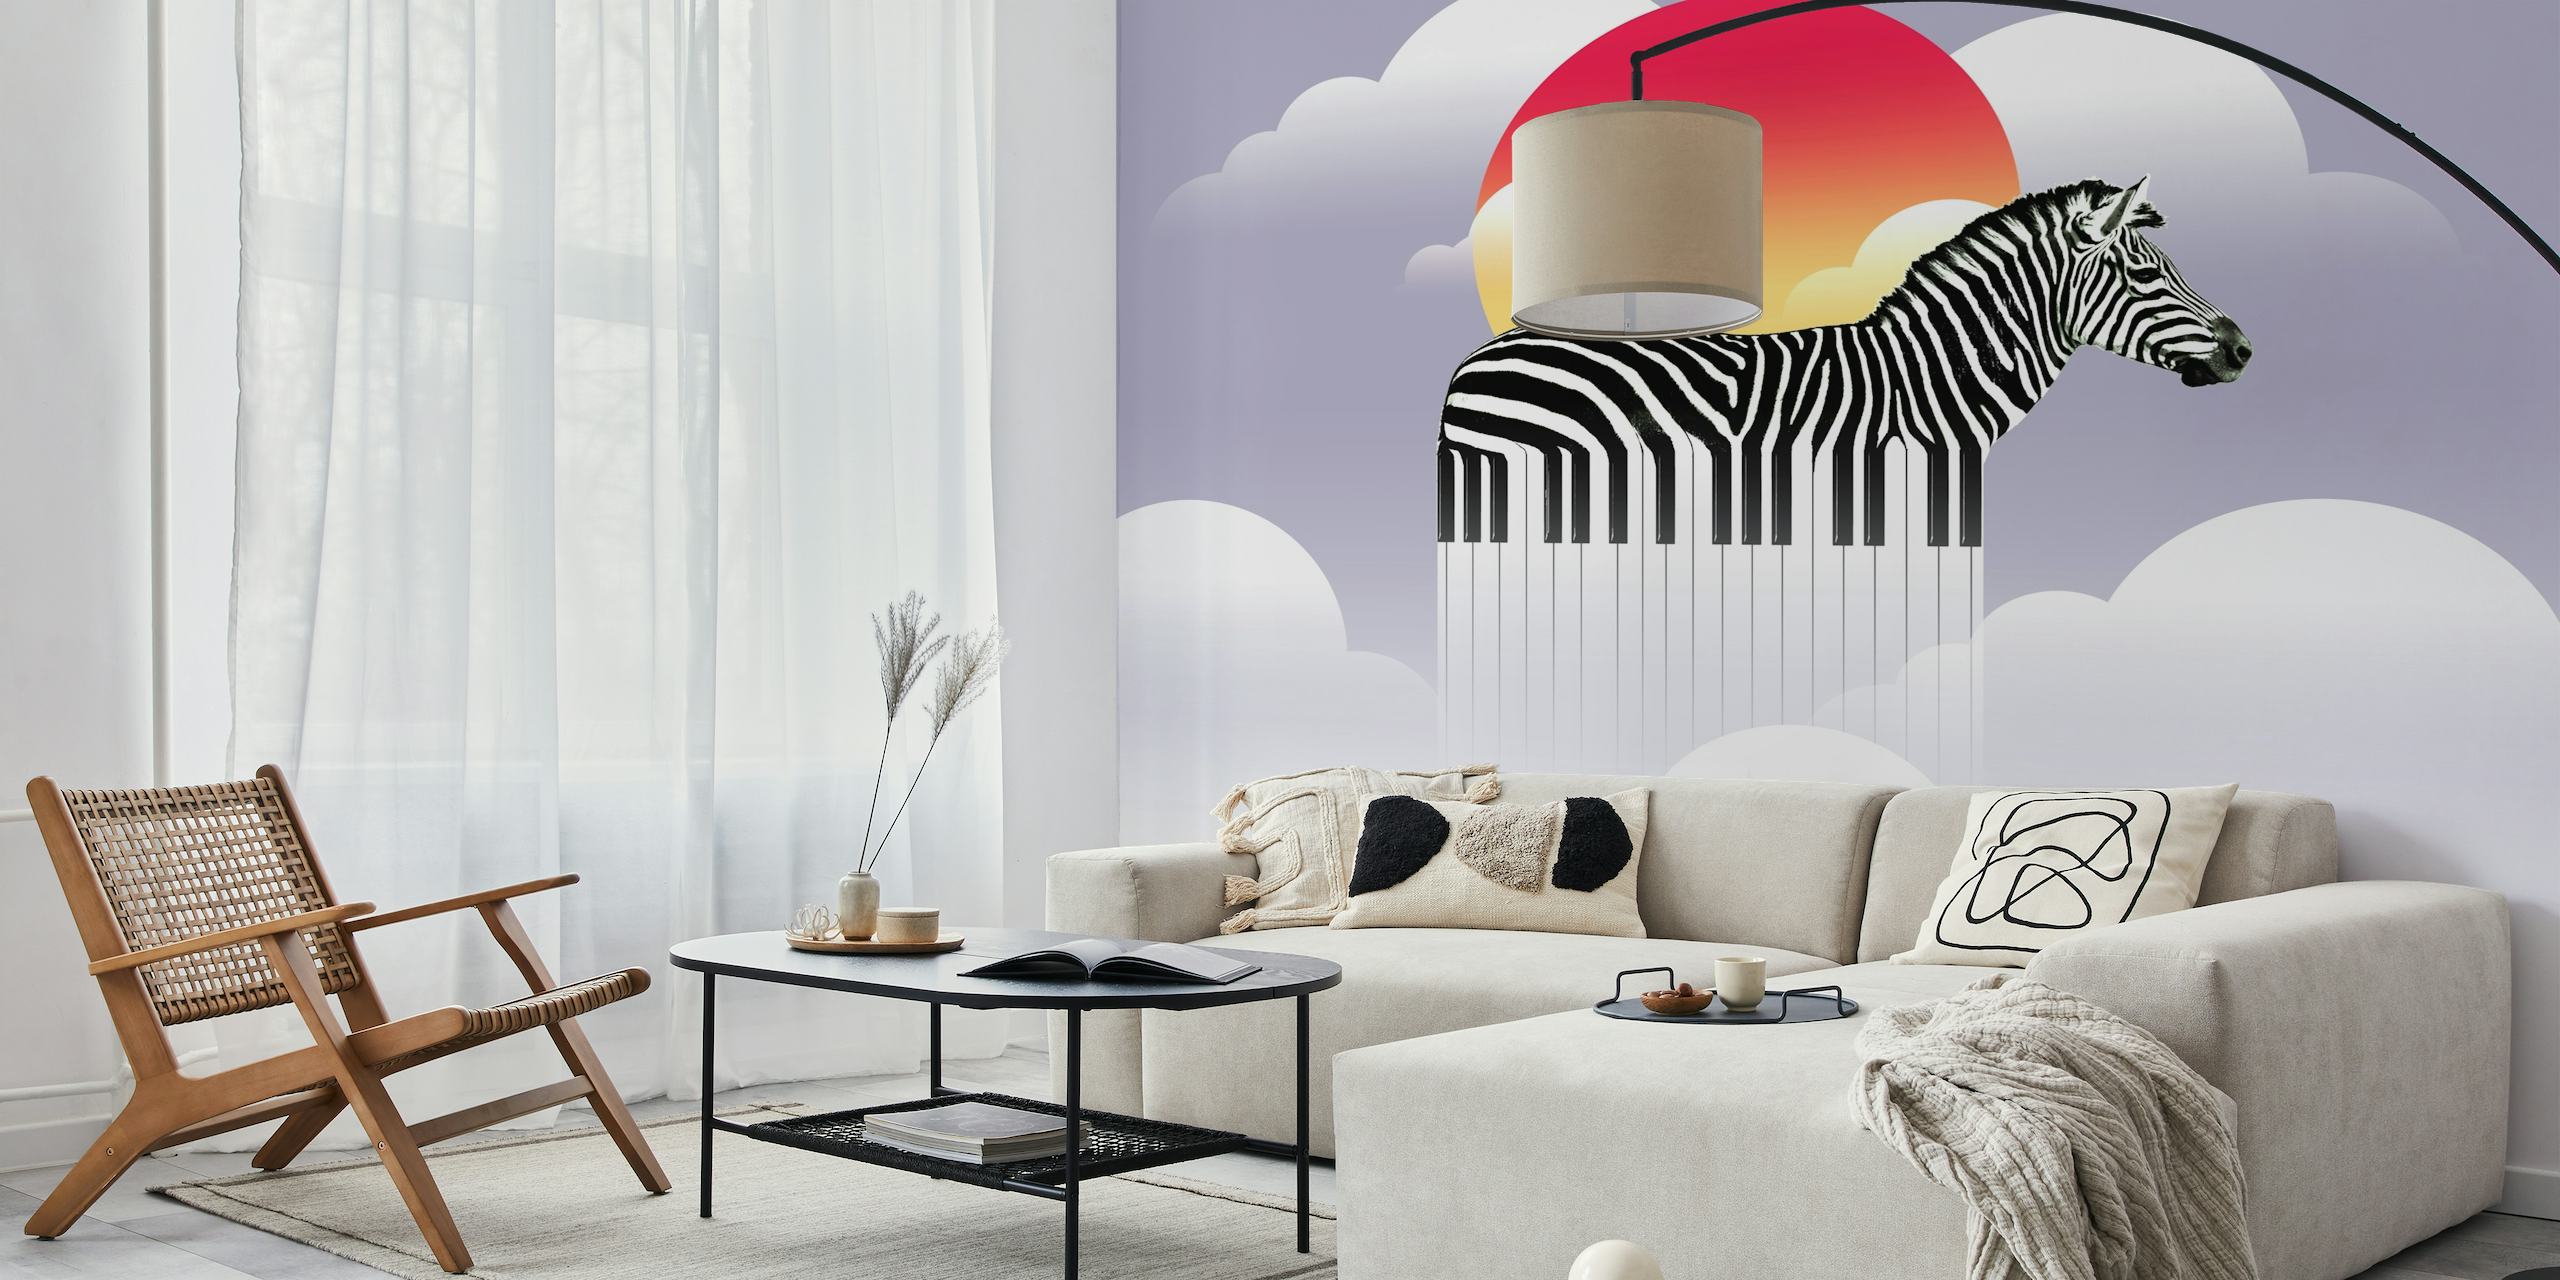 Zeyboard wall mural with artistic zebra and sunset design